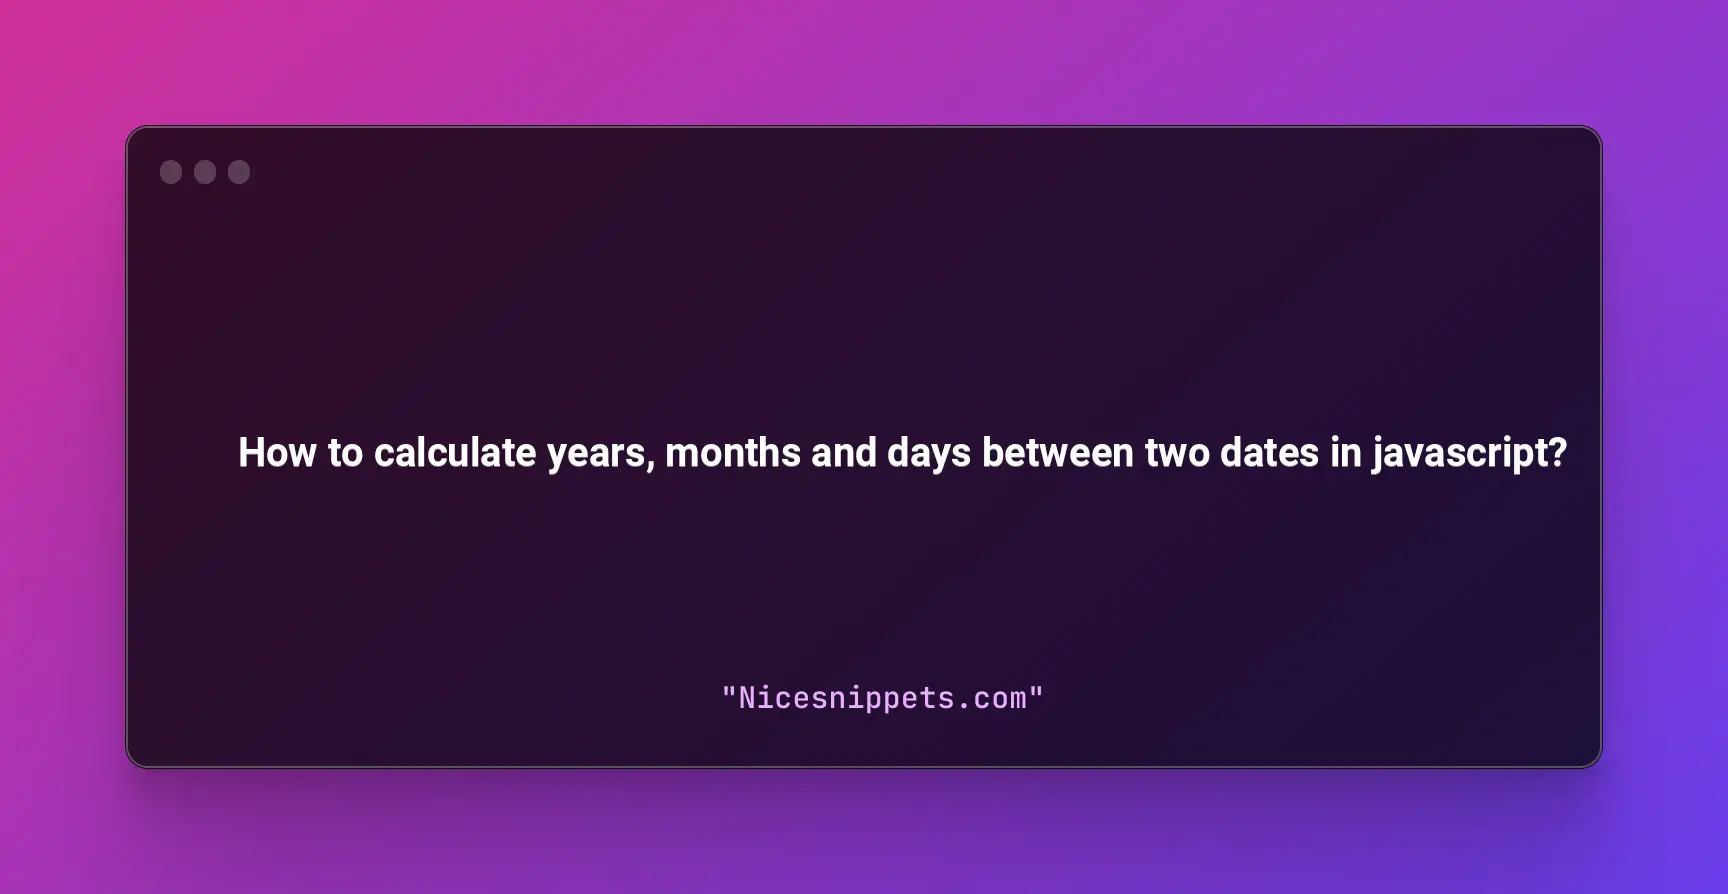 How to calculate years, months and days between two dates in javascript?